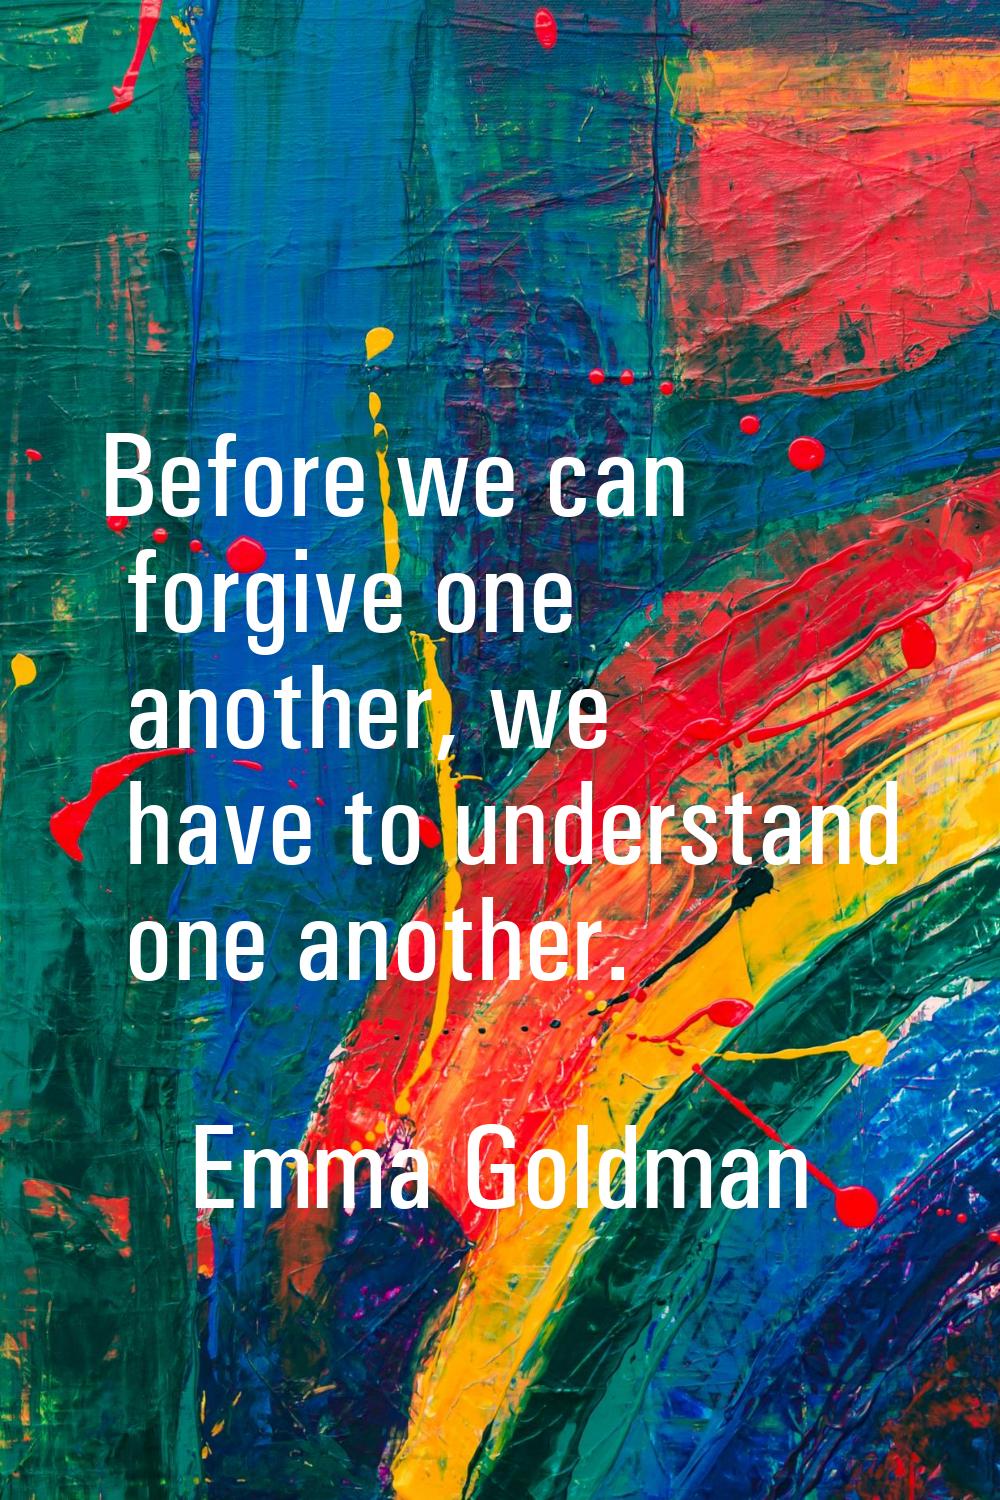 Before we can forgive one another, we have to understand one another.